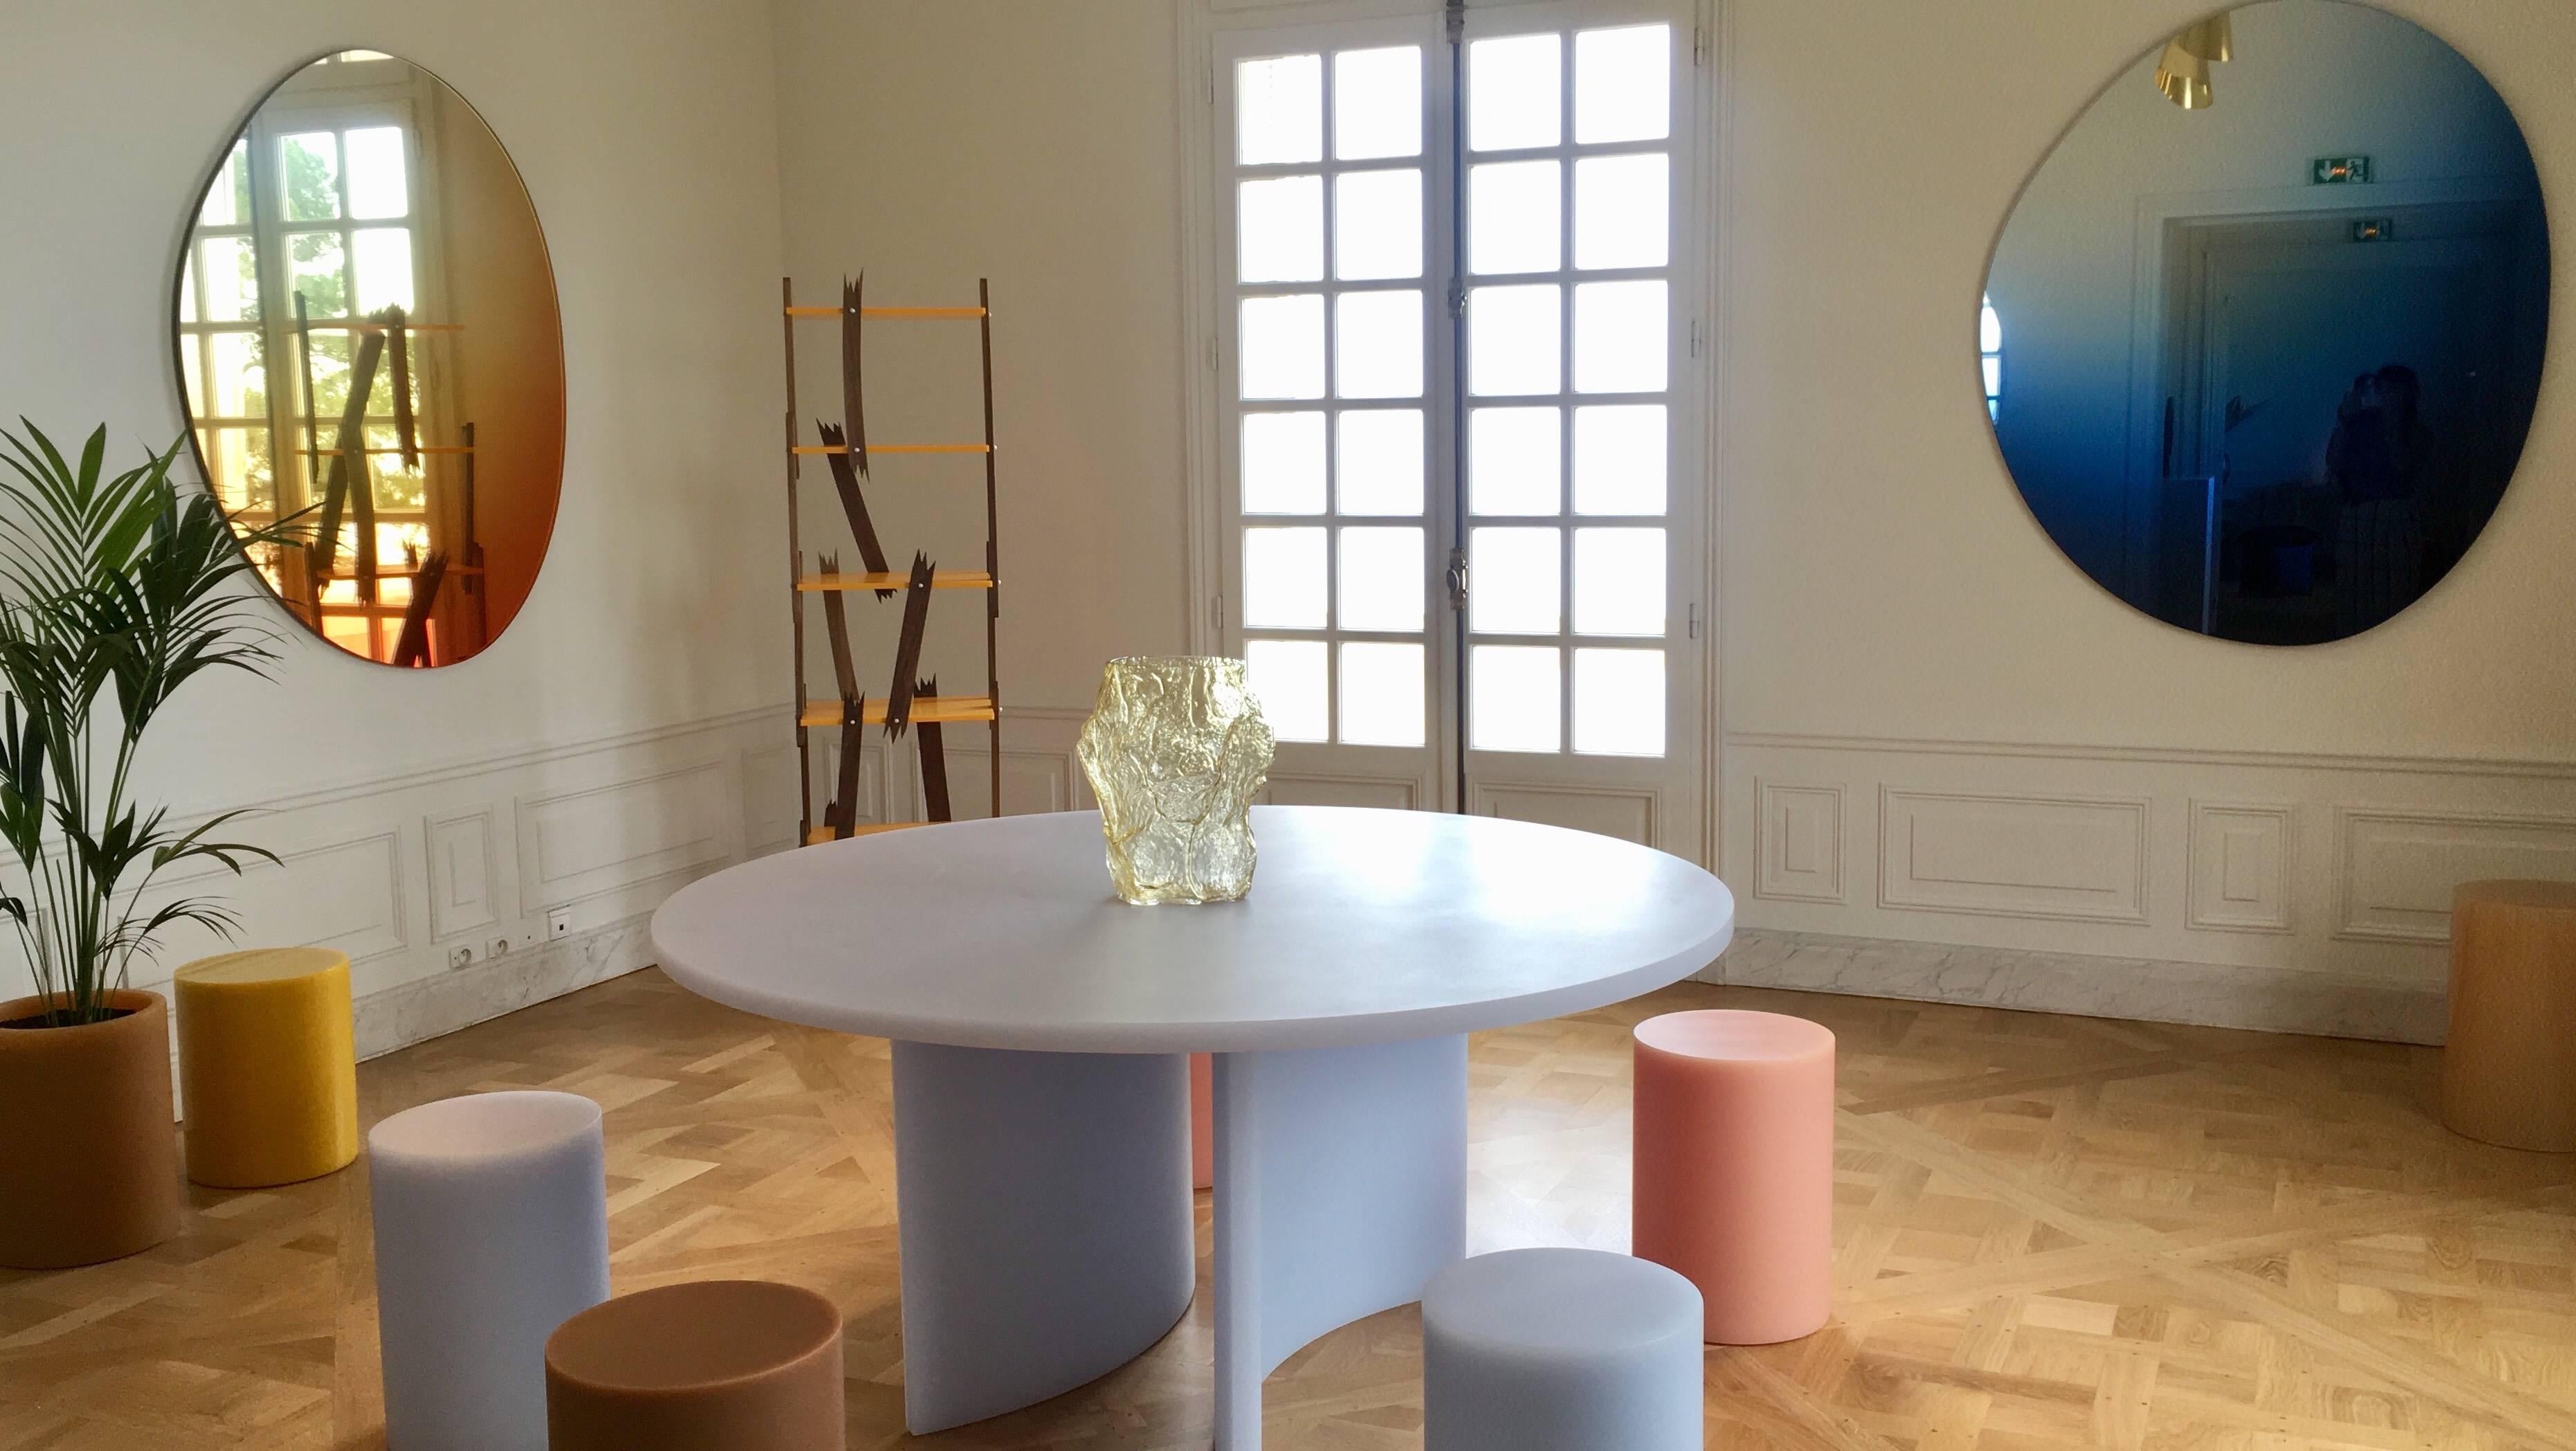 Sabine Marcelis’ new salmon pink soap column stools in matte resin are unveiled at Nomad Monaco 2018, creating a pastel and sculptural mise-en-scéne along with the new round Soap table.